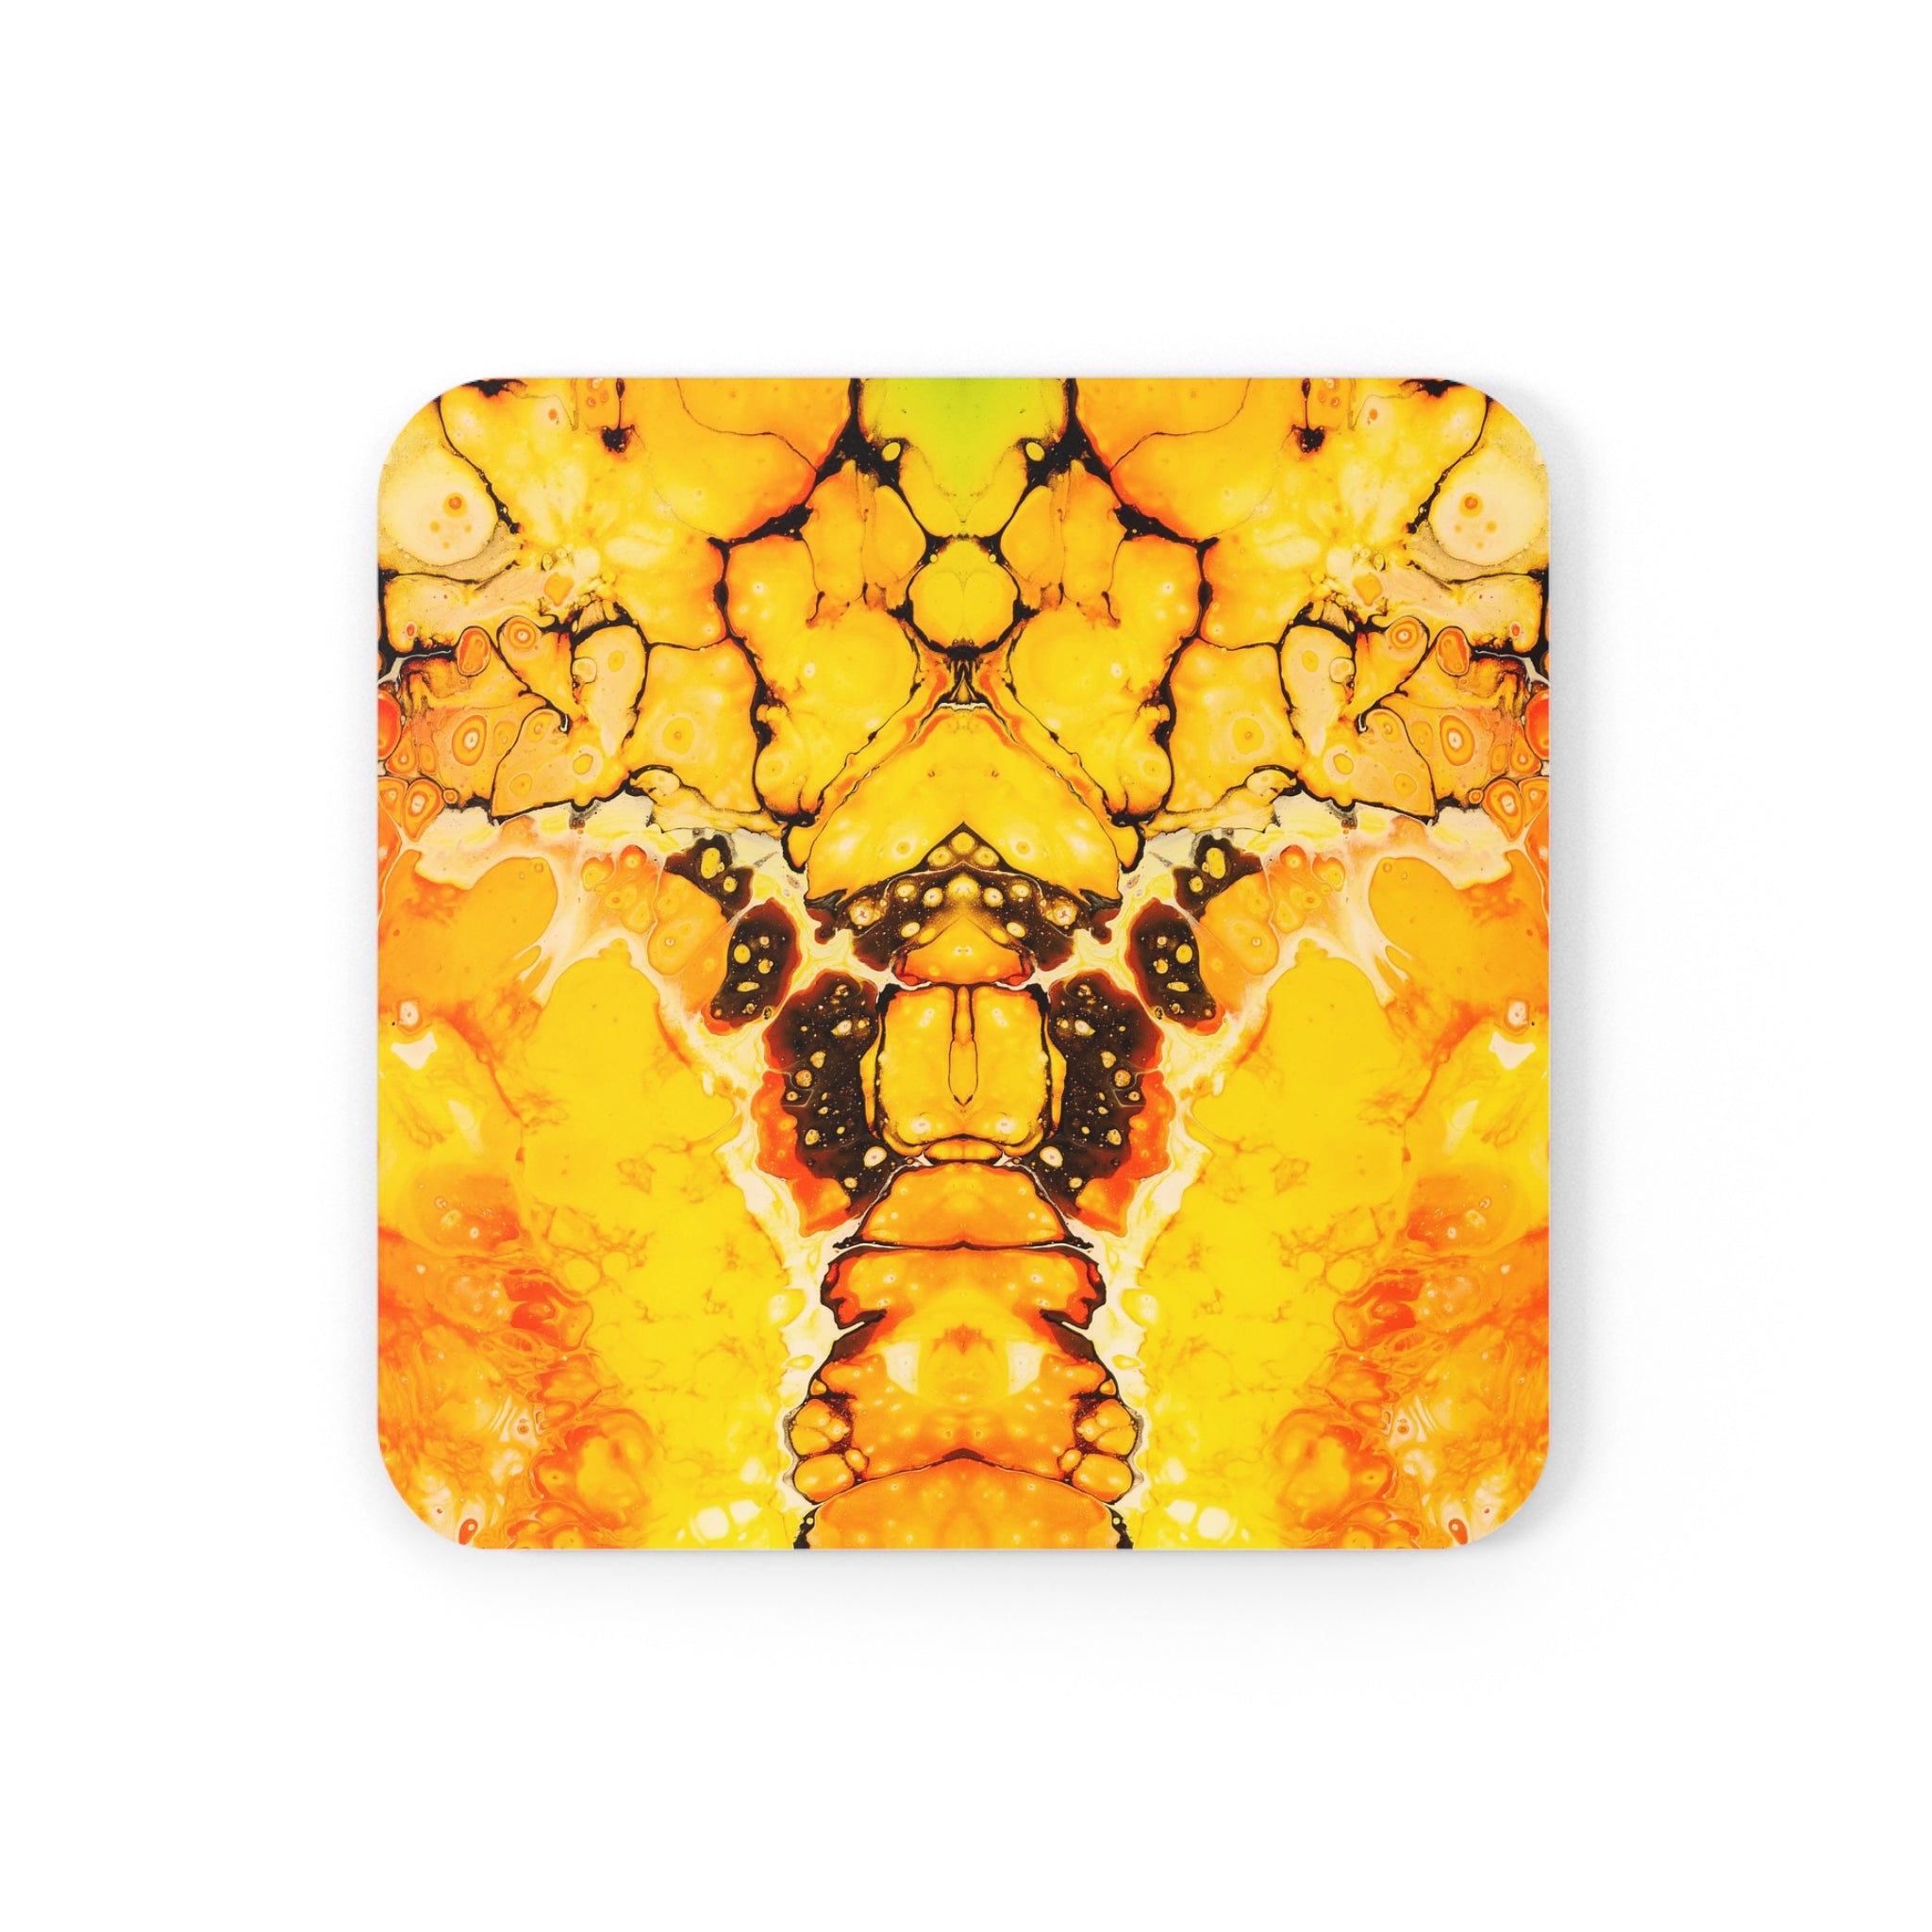 Cameron Creations - Surface Of The Sun - Stylish Coffee Coaster - Square Front